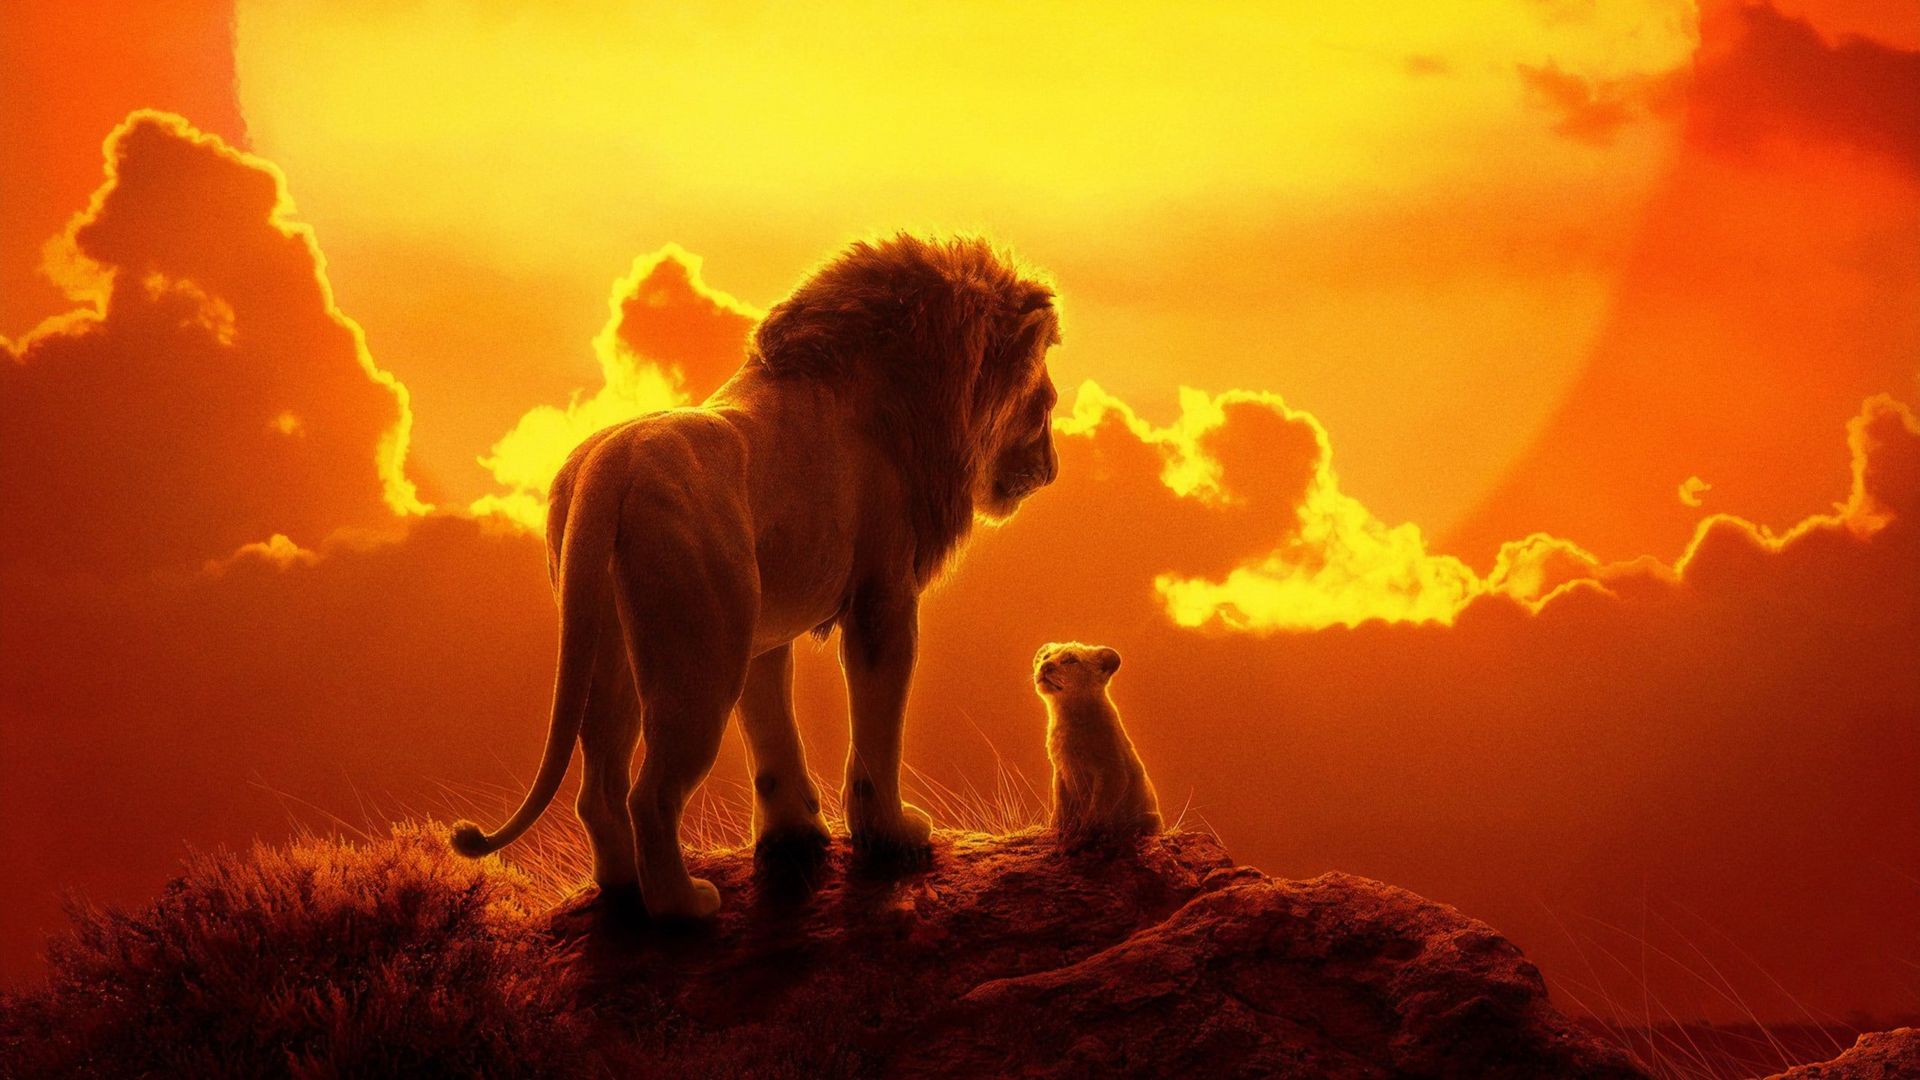 The Lion King Backdrop